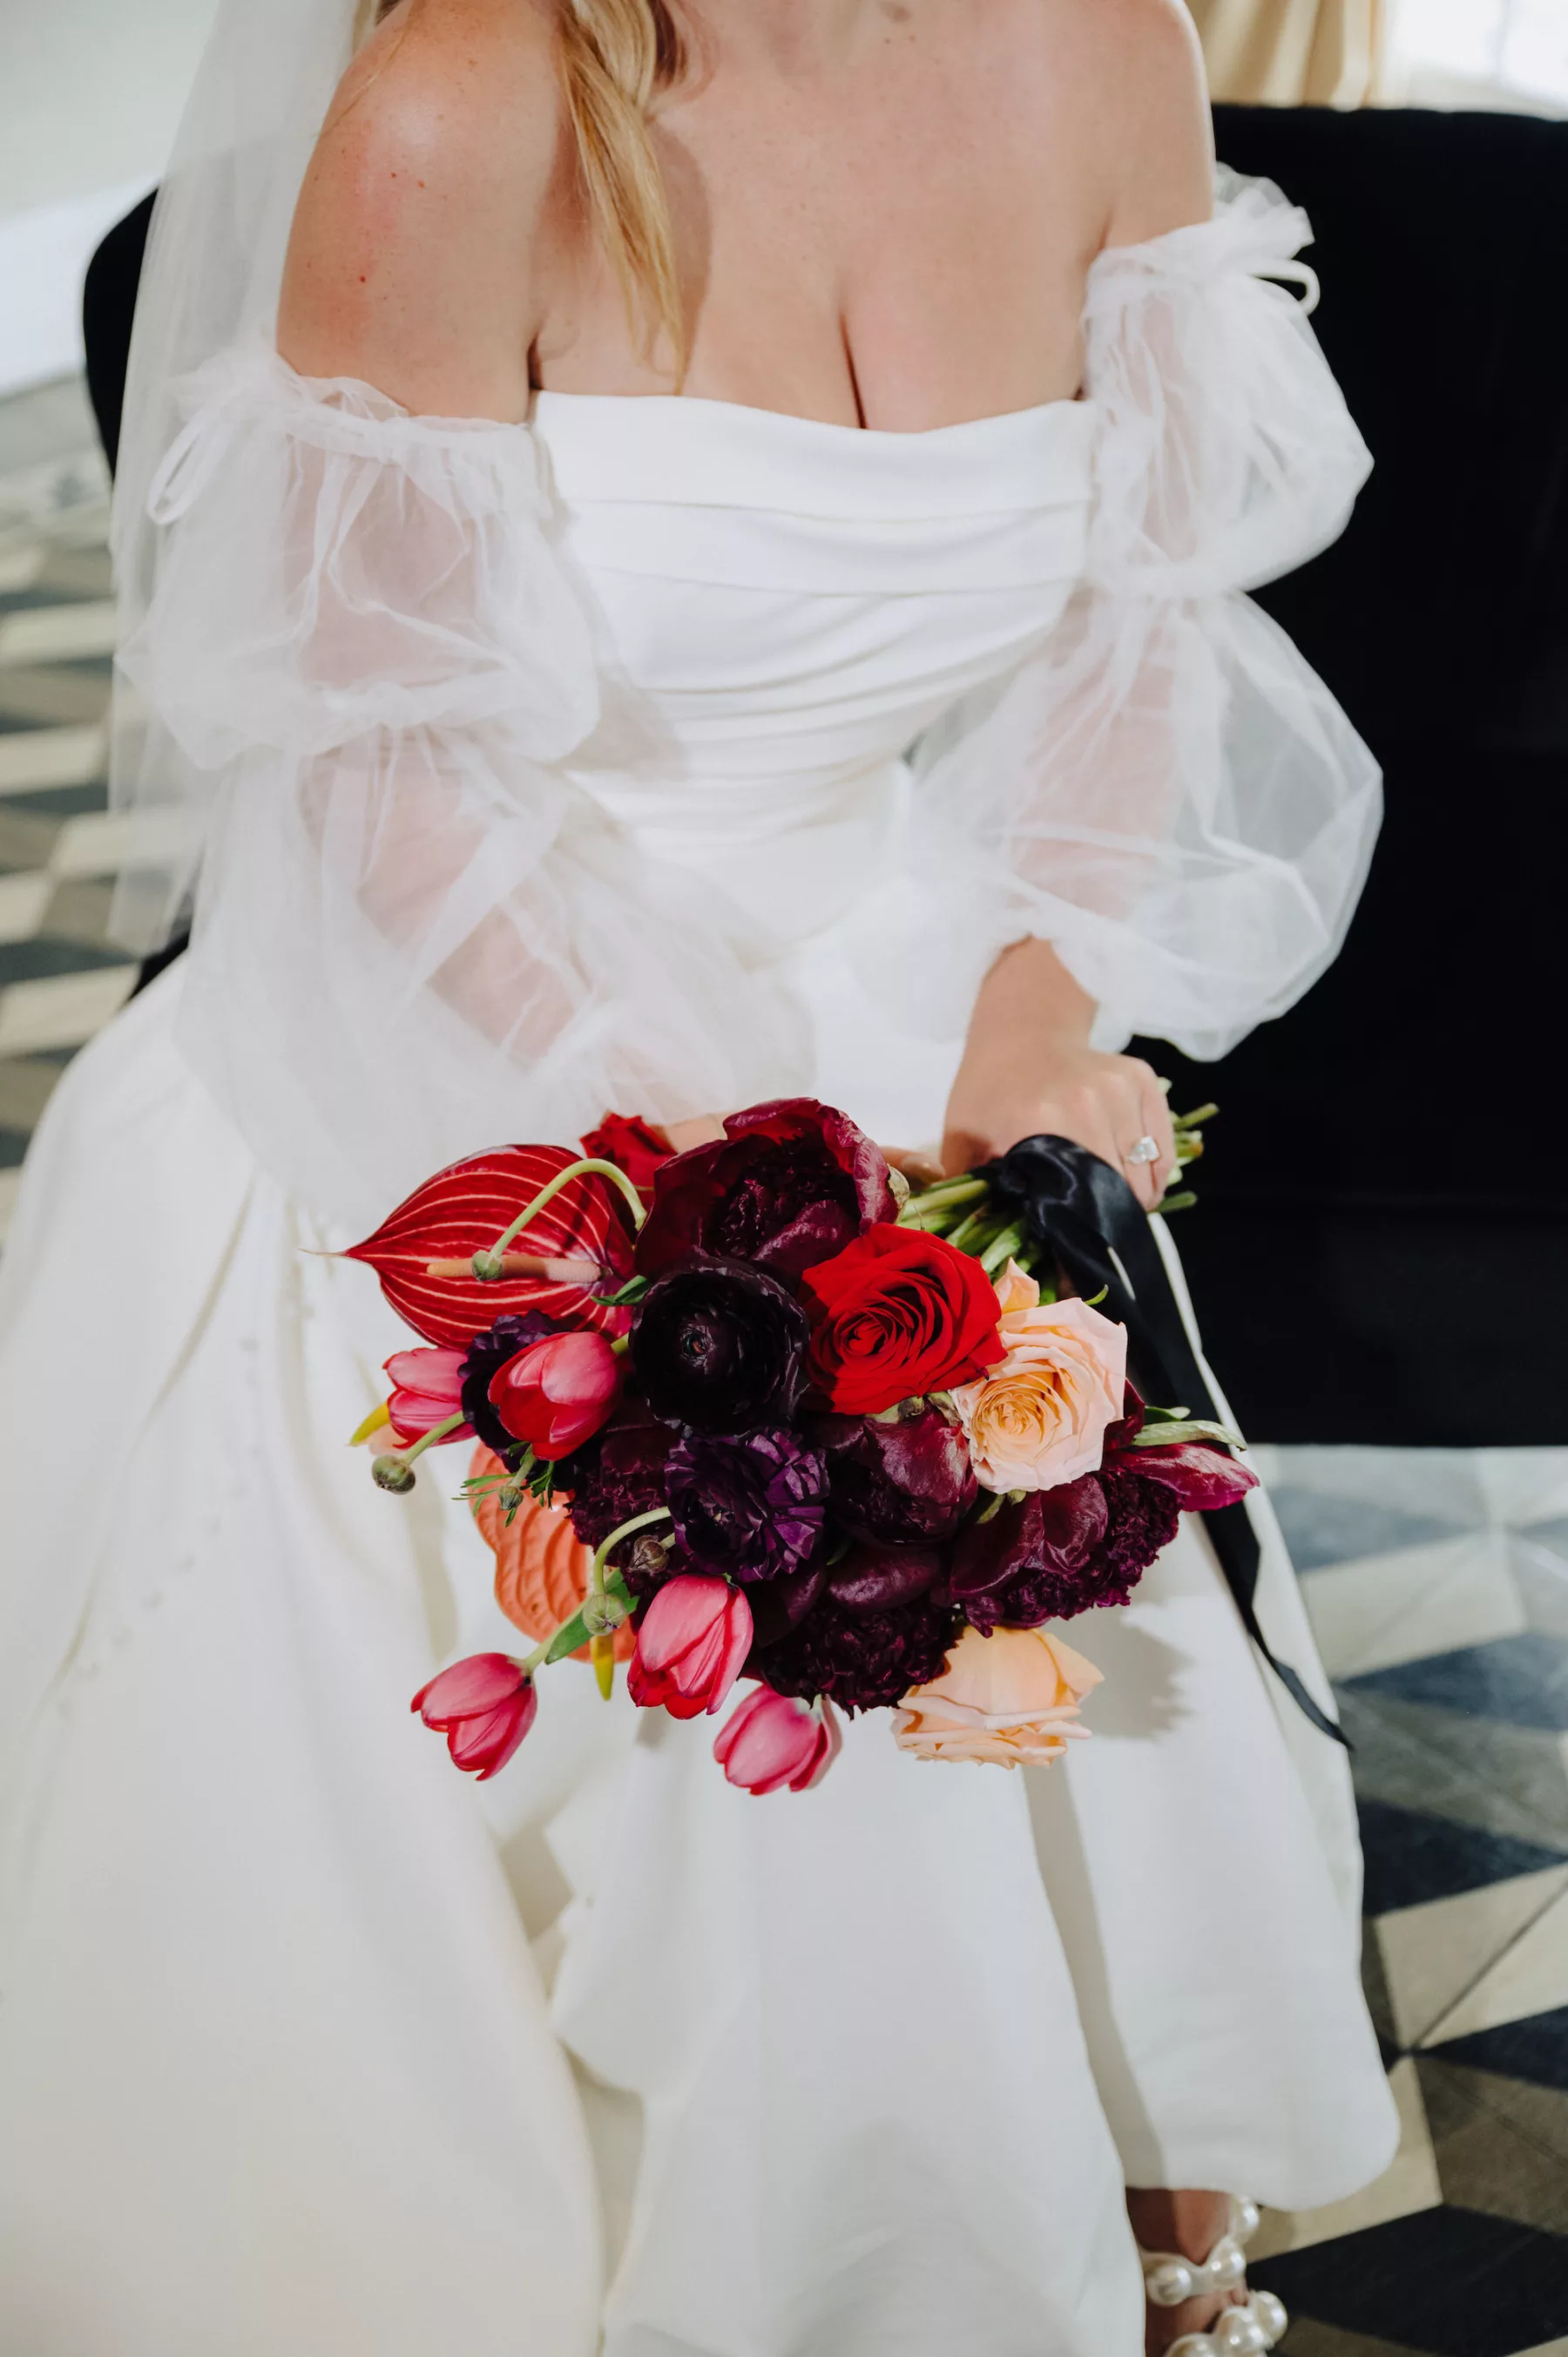 Classic White Strapless Wedding Dress with Tulle Removable Sleeves Inspiration | Bold Spring Bridal Bouquet with Red Anthurium and Roses, Pink Tulips | Tampa Bay Florist Save The Date Florida